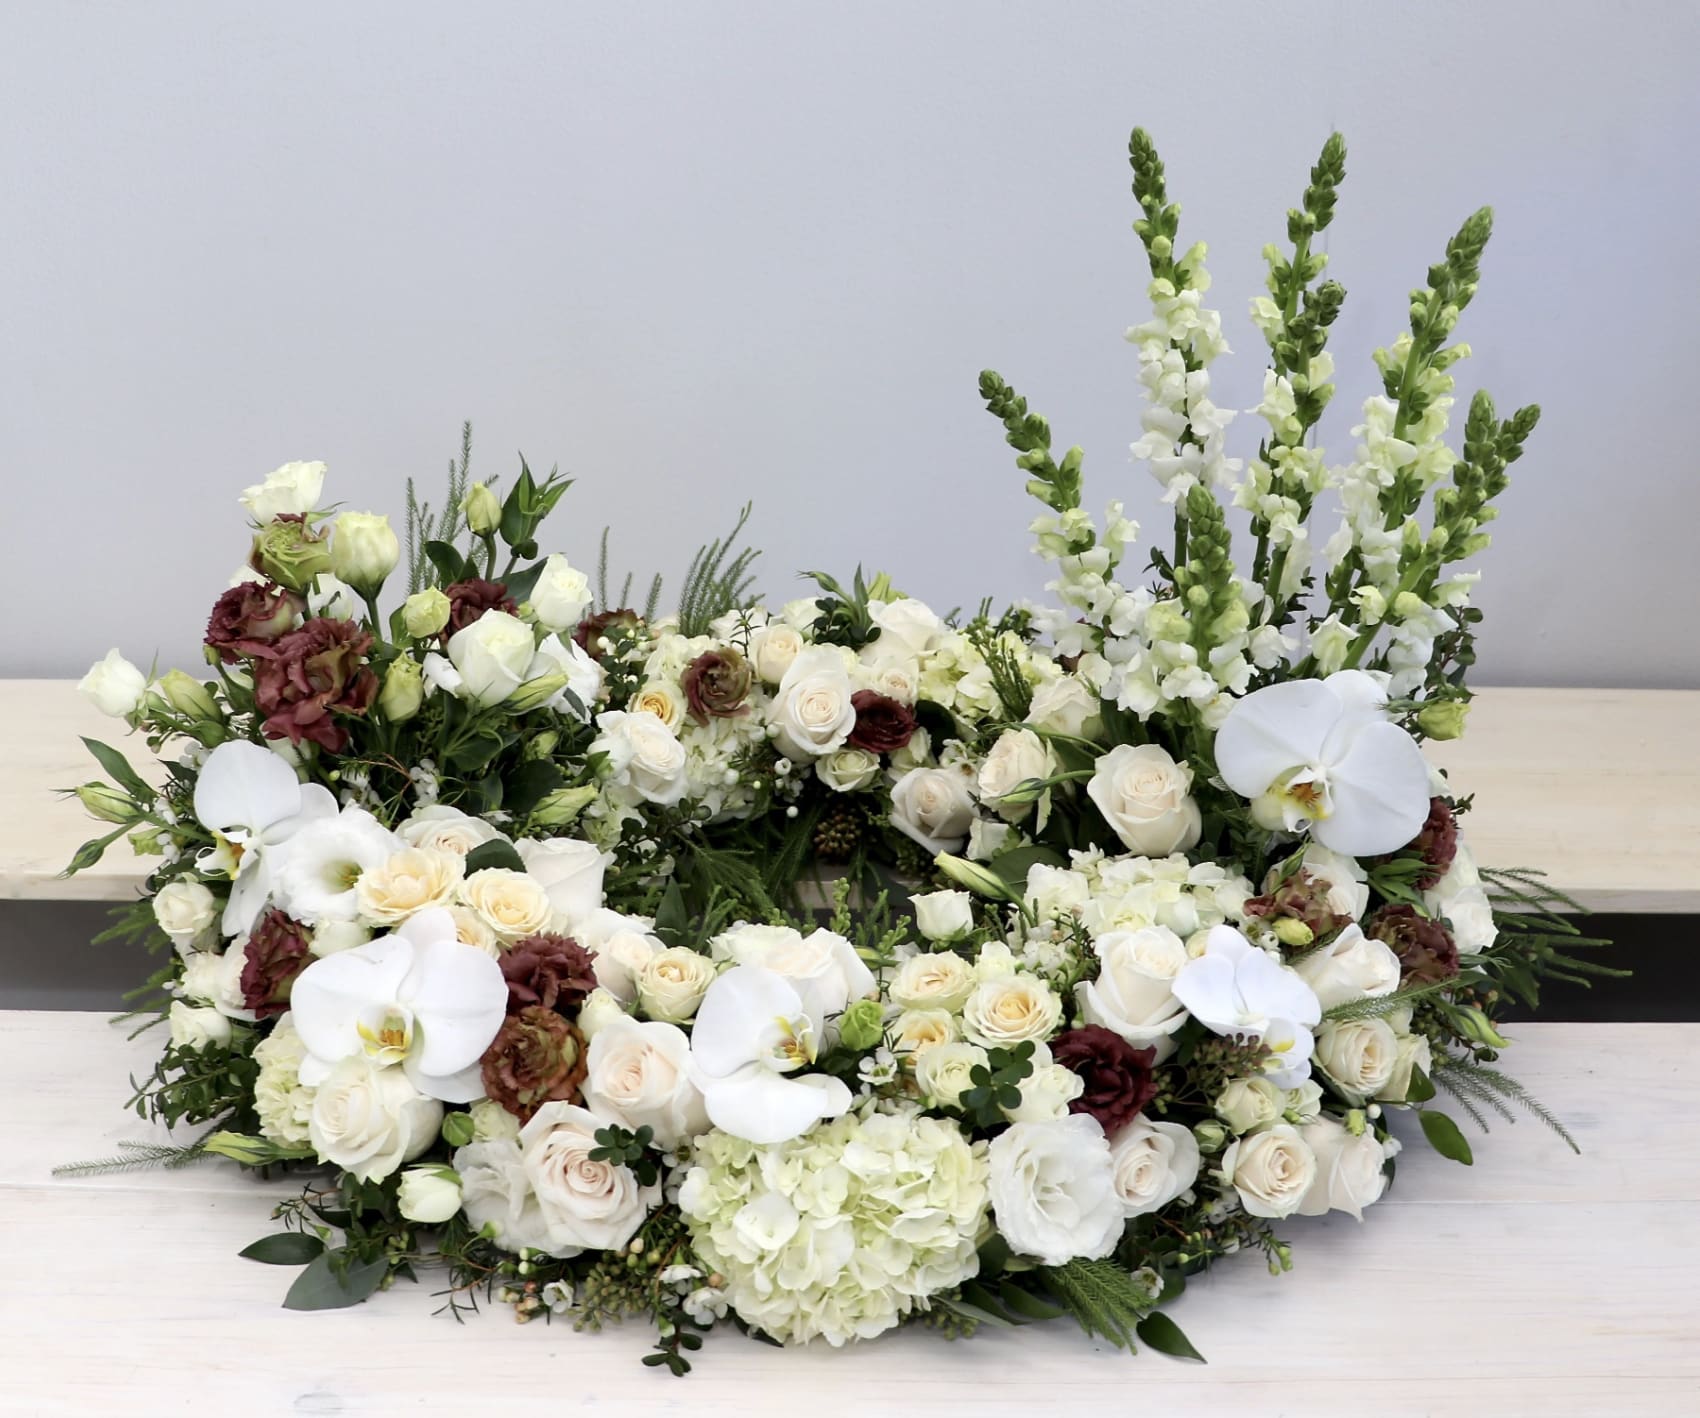 Urn Wreath  - This urn tribute wreath includes a mix of flowers, roses, and seasonal greens. In the special instruction let us know what colors you would like. Standard size is 30'', deluxe is 36'' and premium is 42''. Interior diameter is about 10'' for standard size.